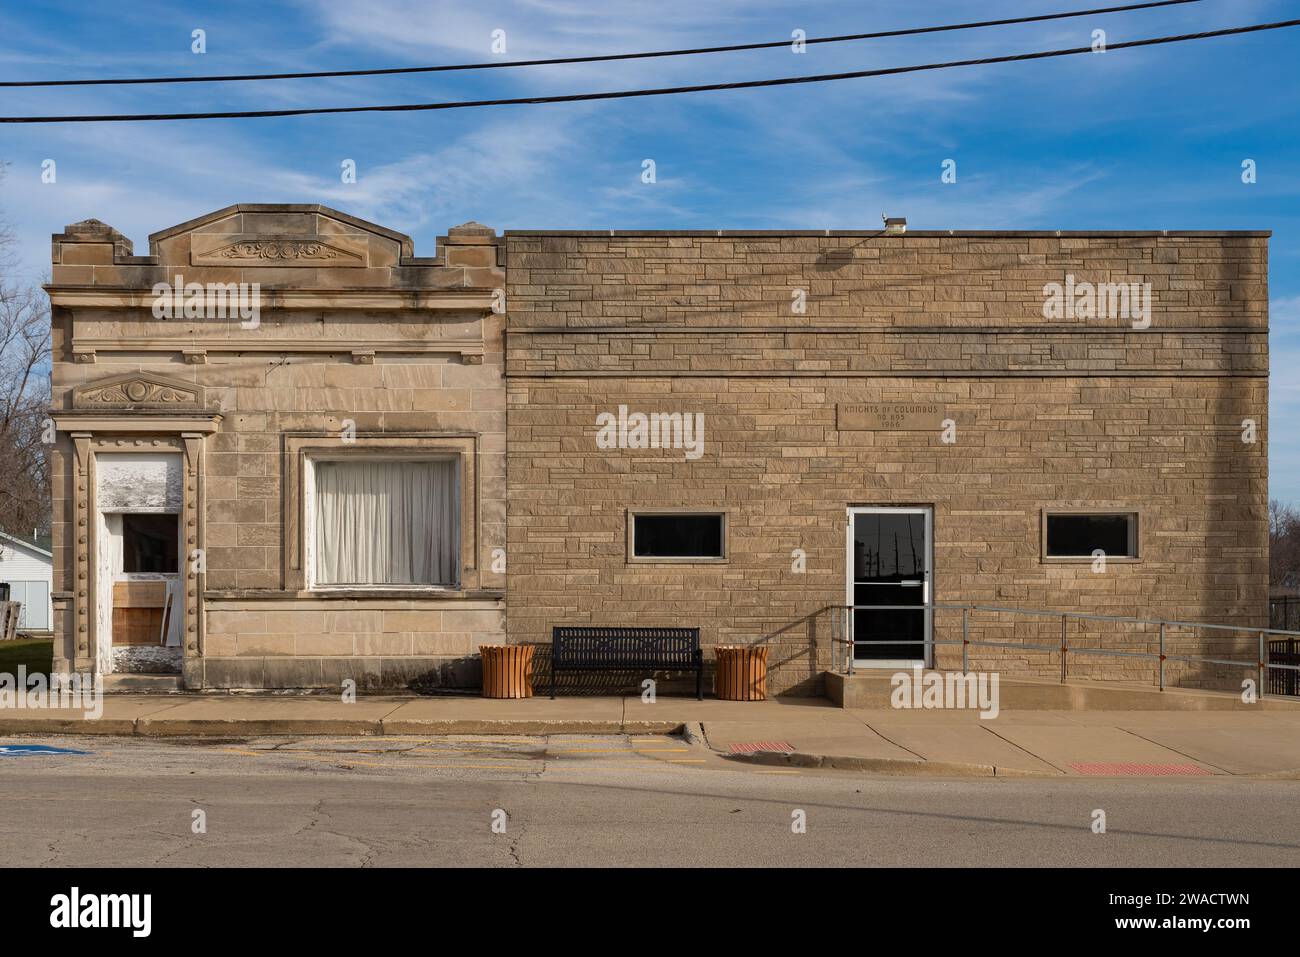 Exterior of downtown building in Odell, Illinois, USA. Stock Photo